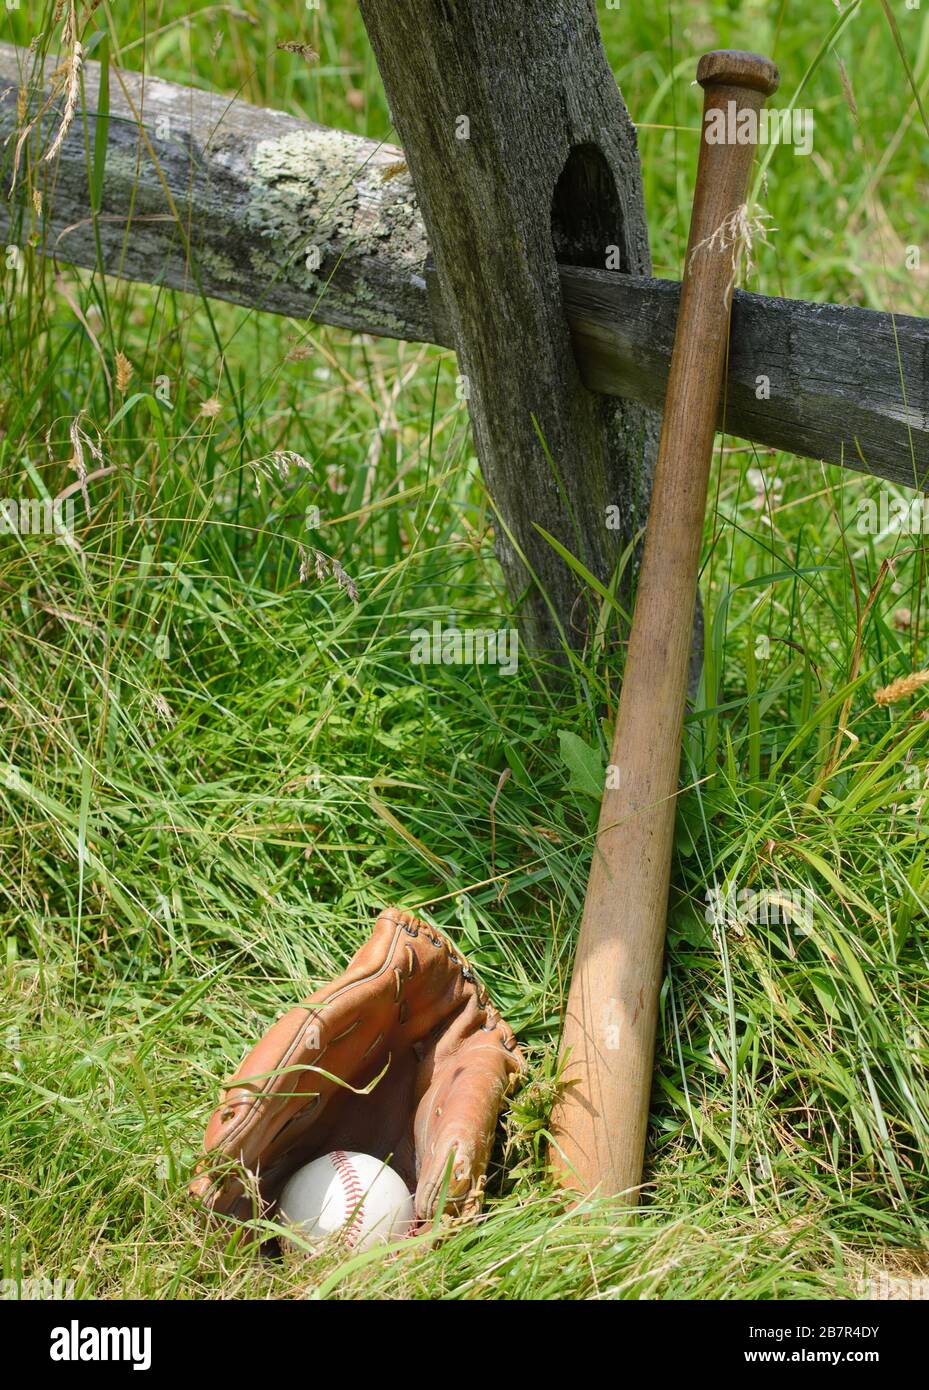 Baseball glove with ball inside and a bat leaning against a an old post. Stock Photo